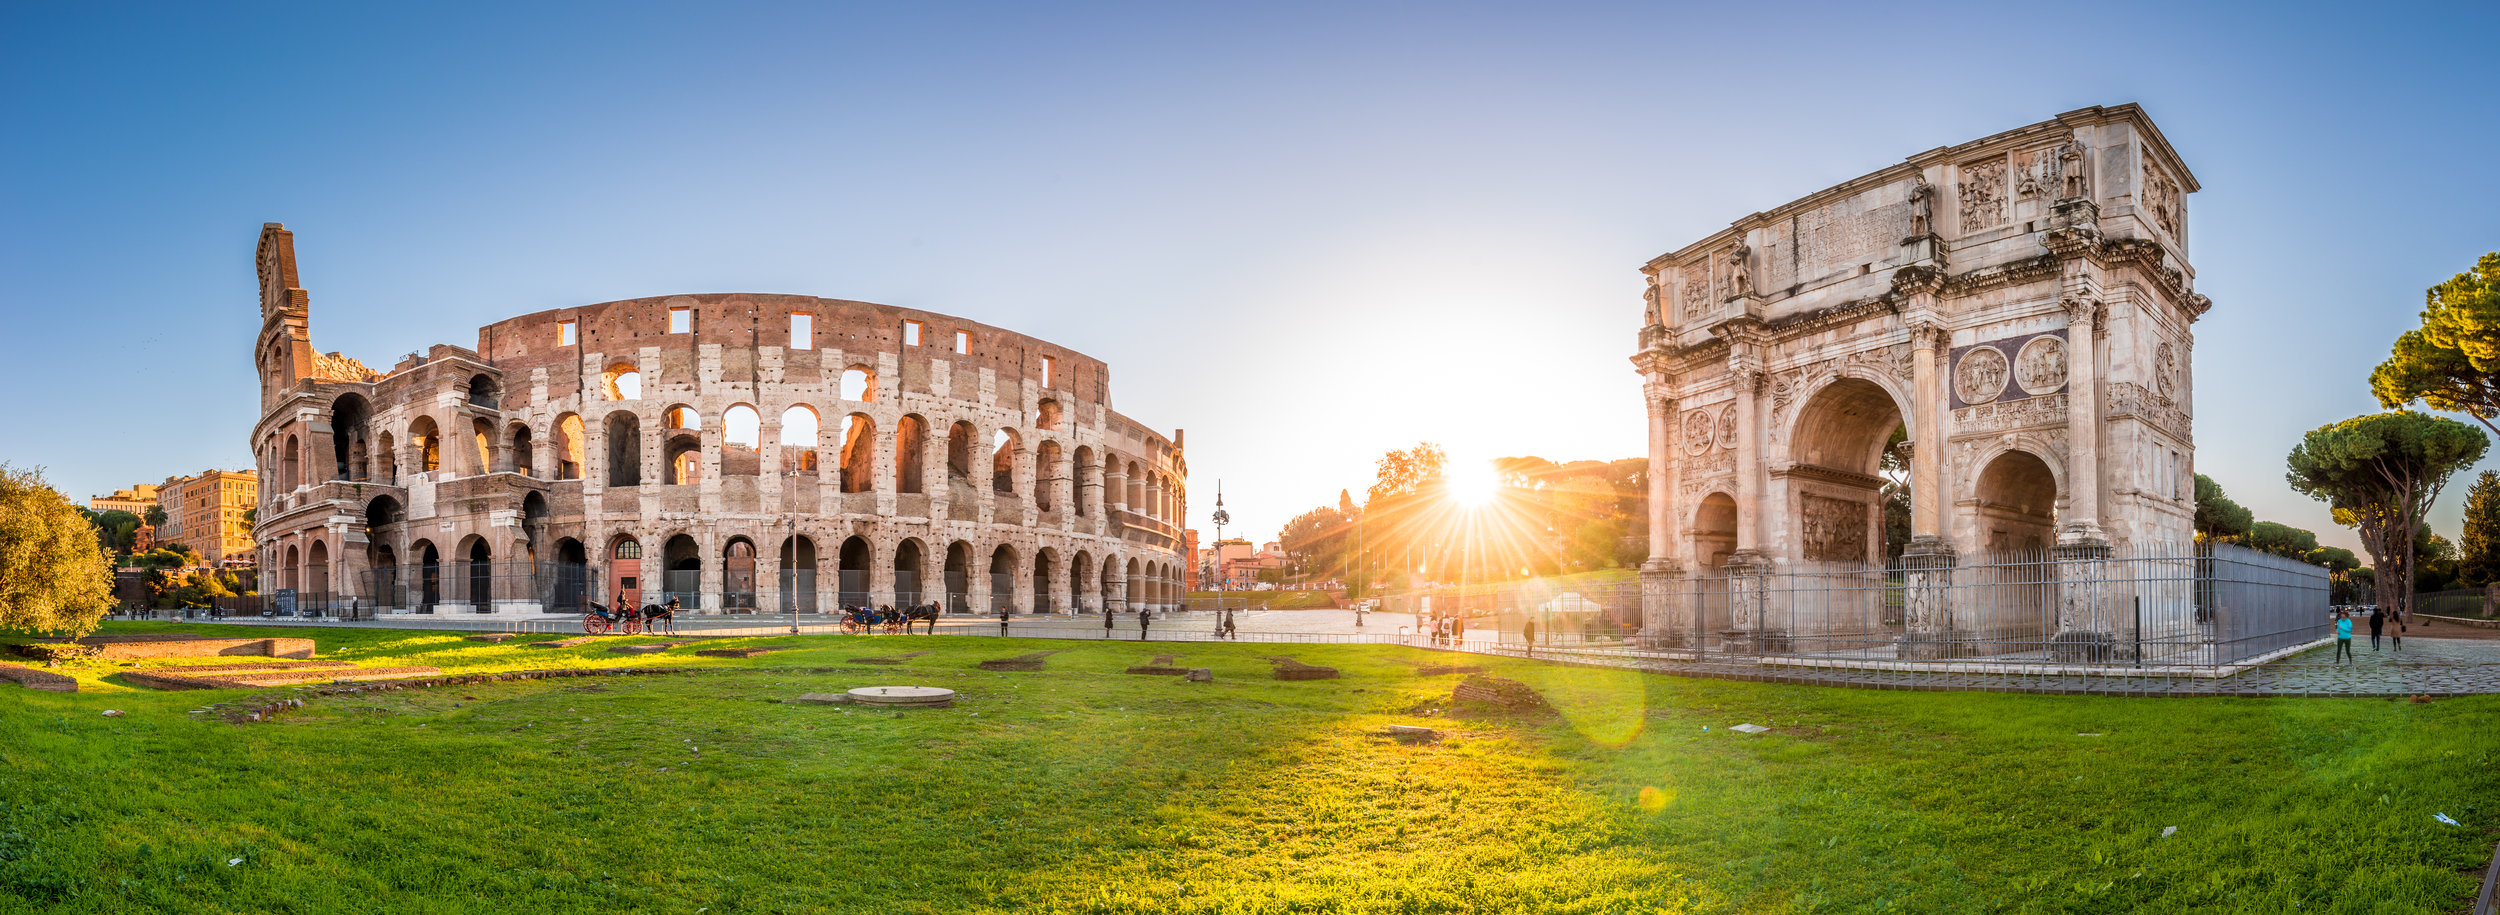 Colosseum-and-Constantine-Arch-at-sunrise,-Rome.-Panorama-641372858_7034x2574.jpeg